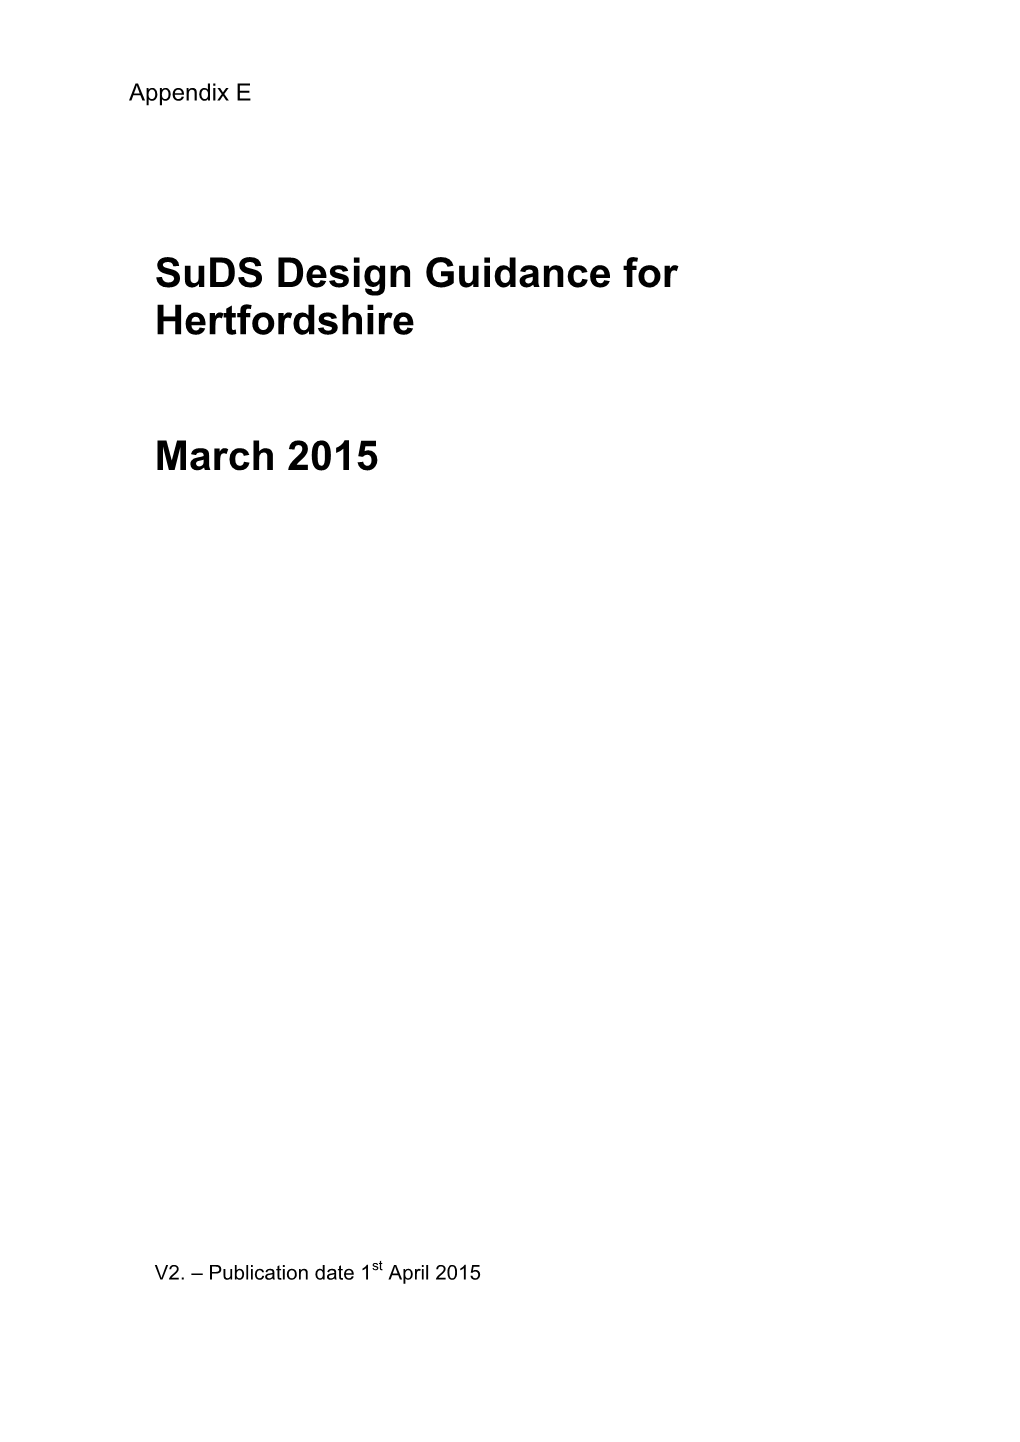 Suds Design Guidance for Hertfordshire March 2015